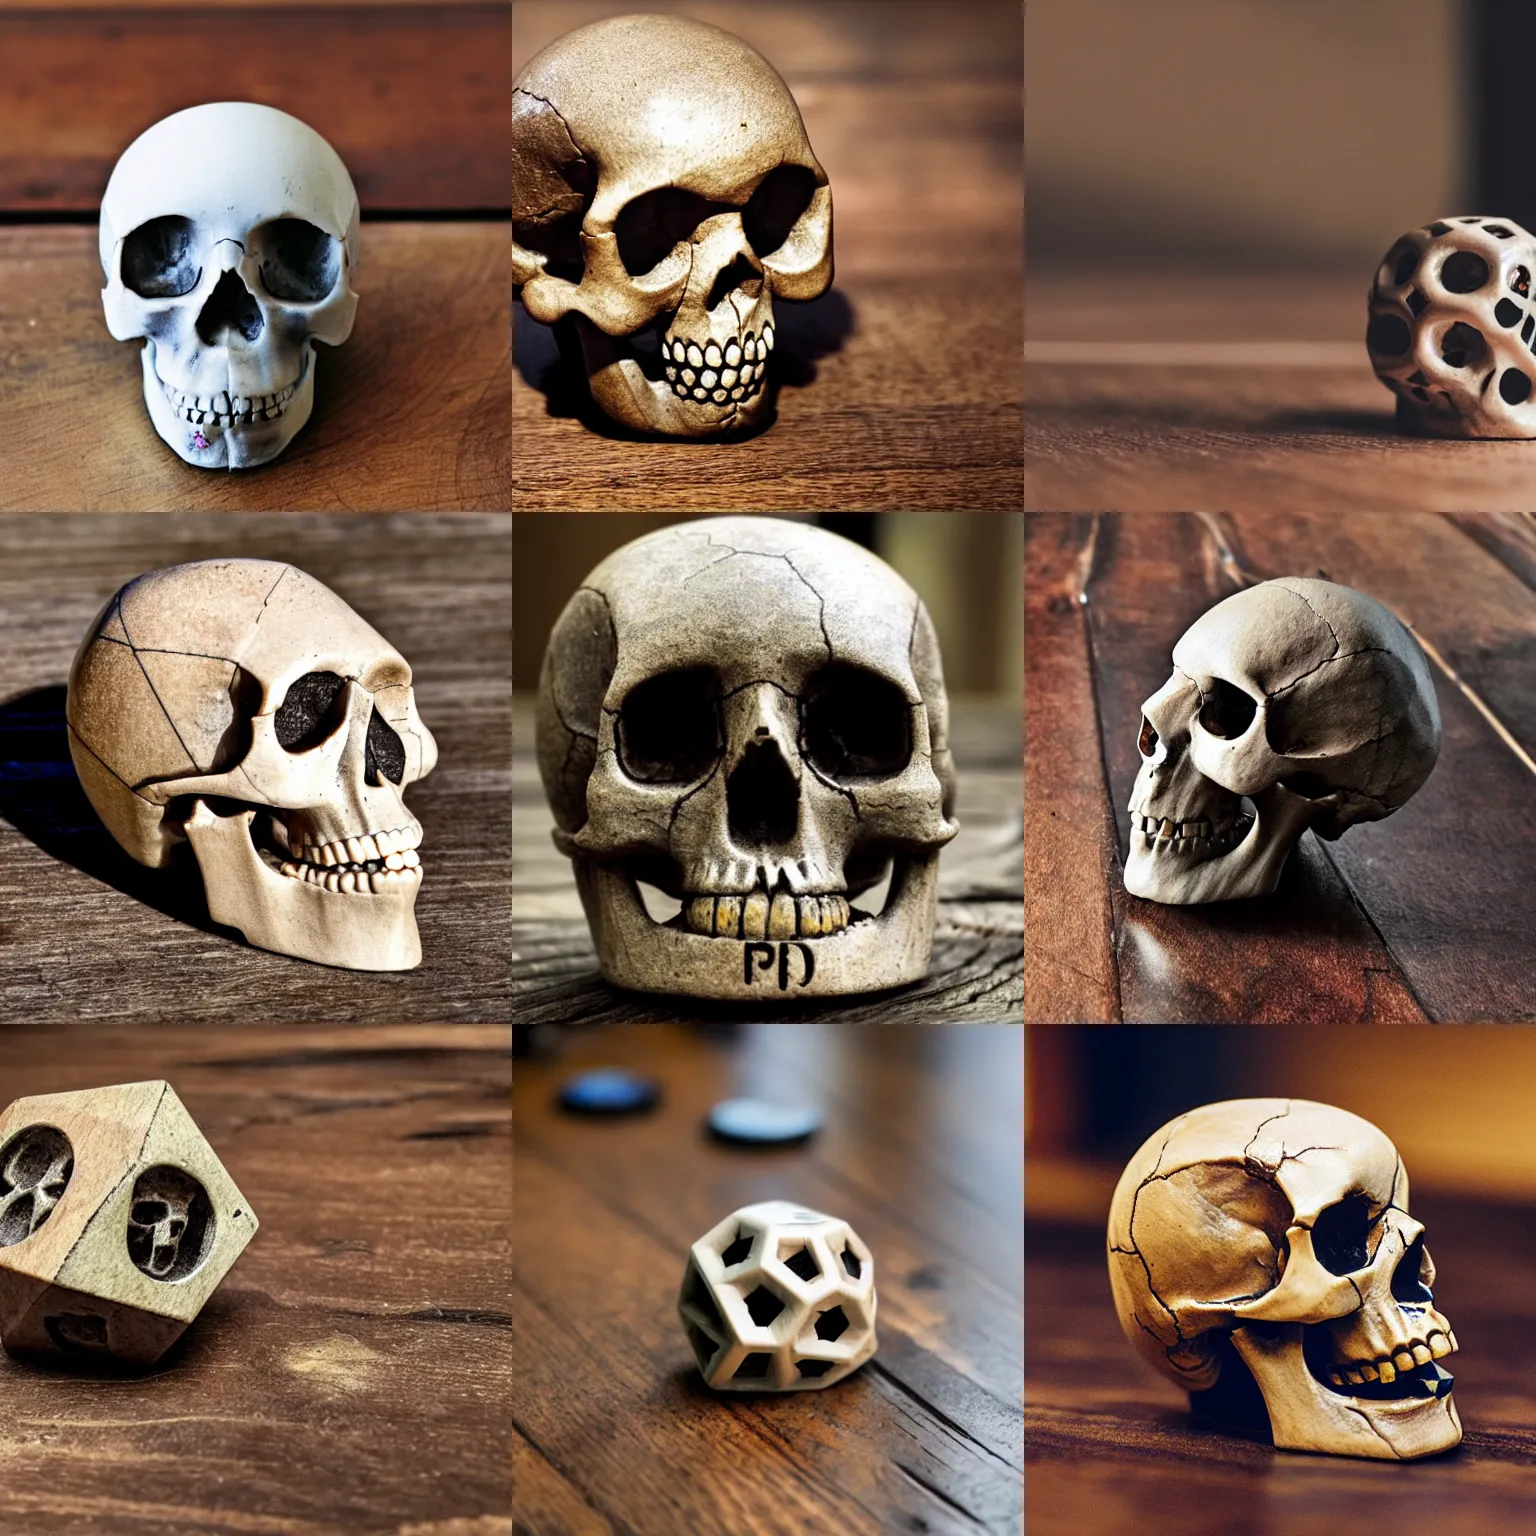 Prompt: a human skull that is also a 6-sided die, on a worn wooden table